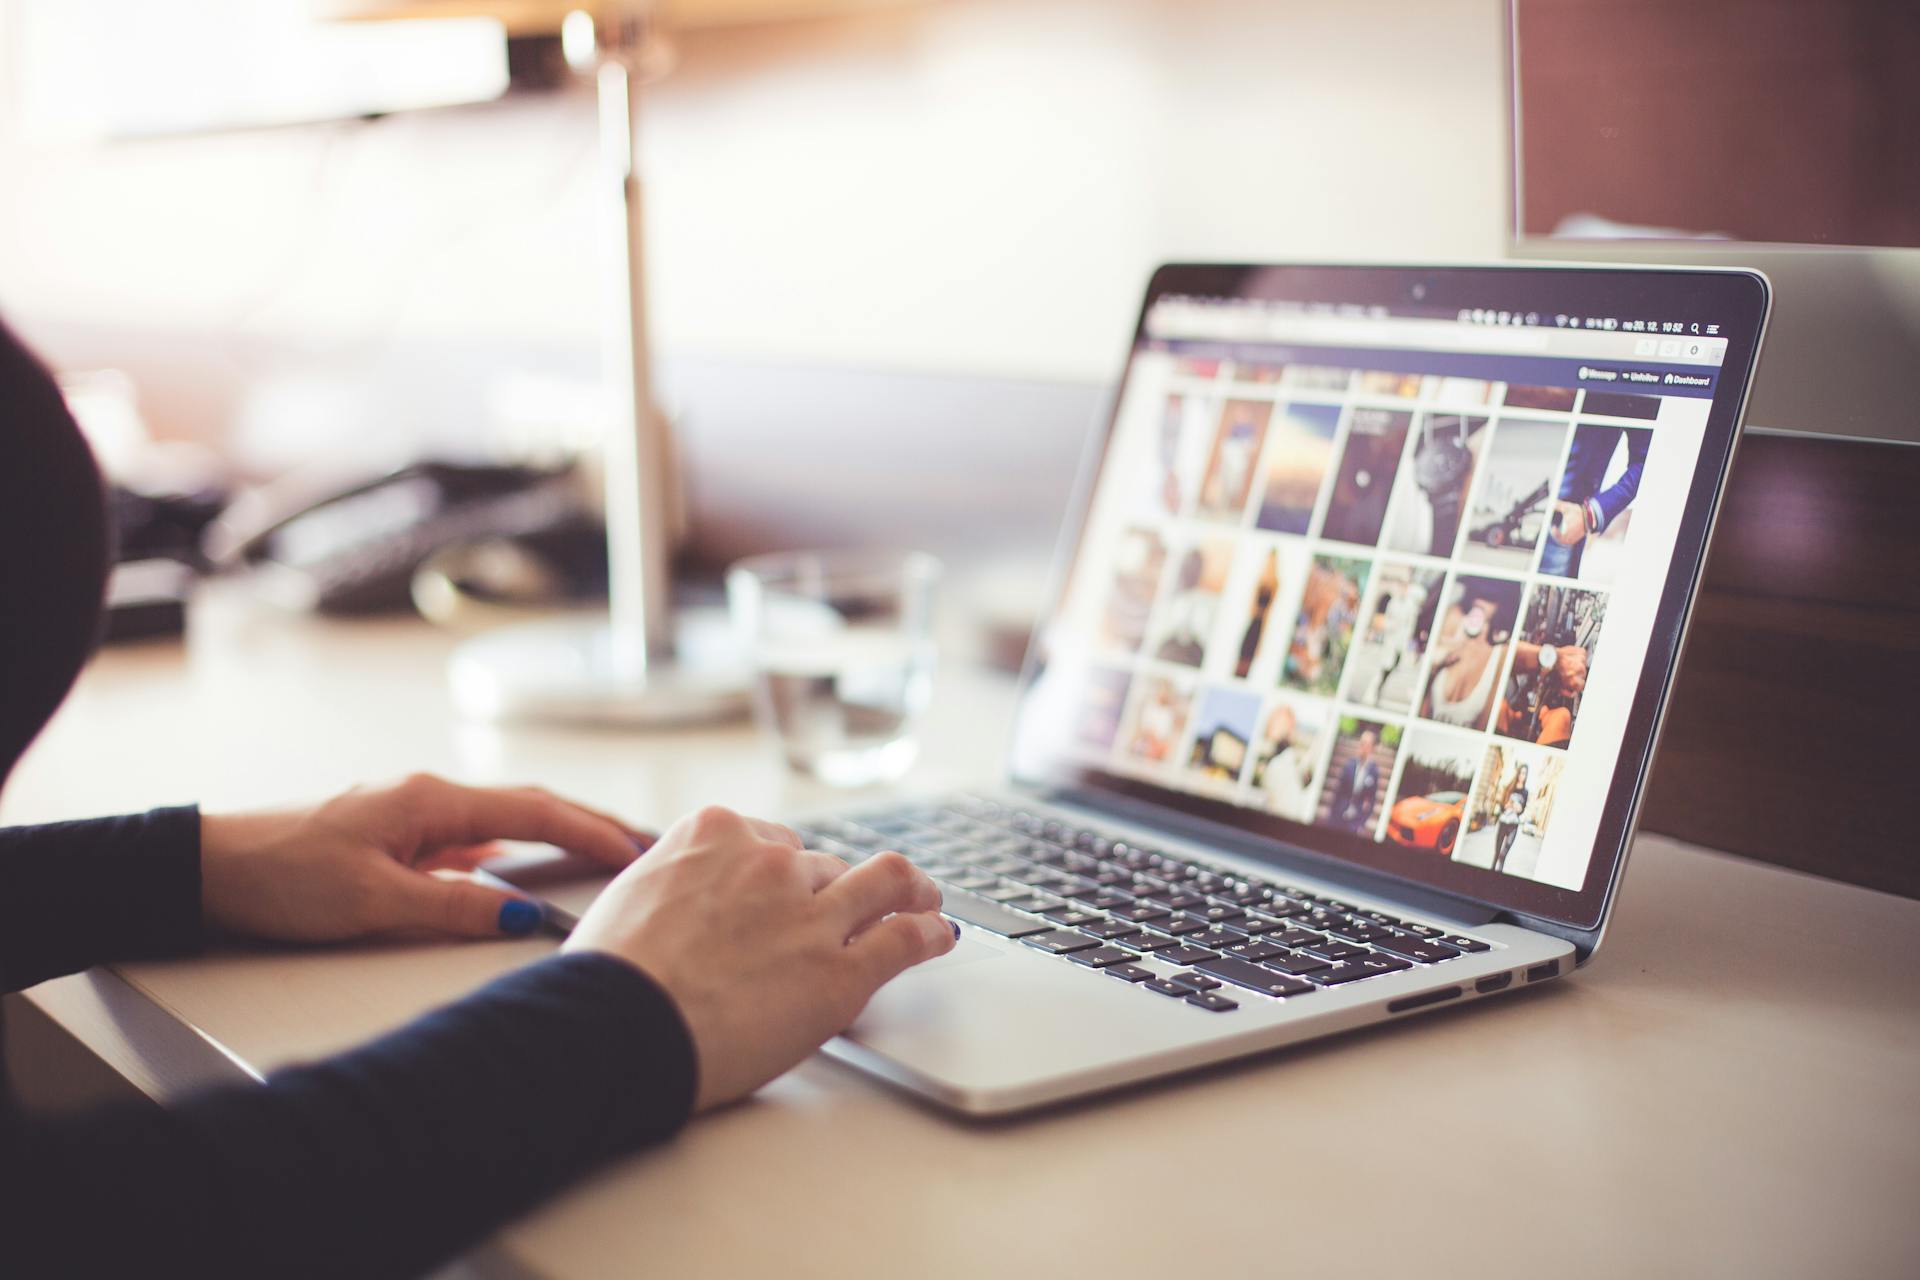 A person viewing images on their laptop | Source: Pexels